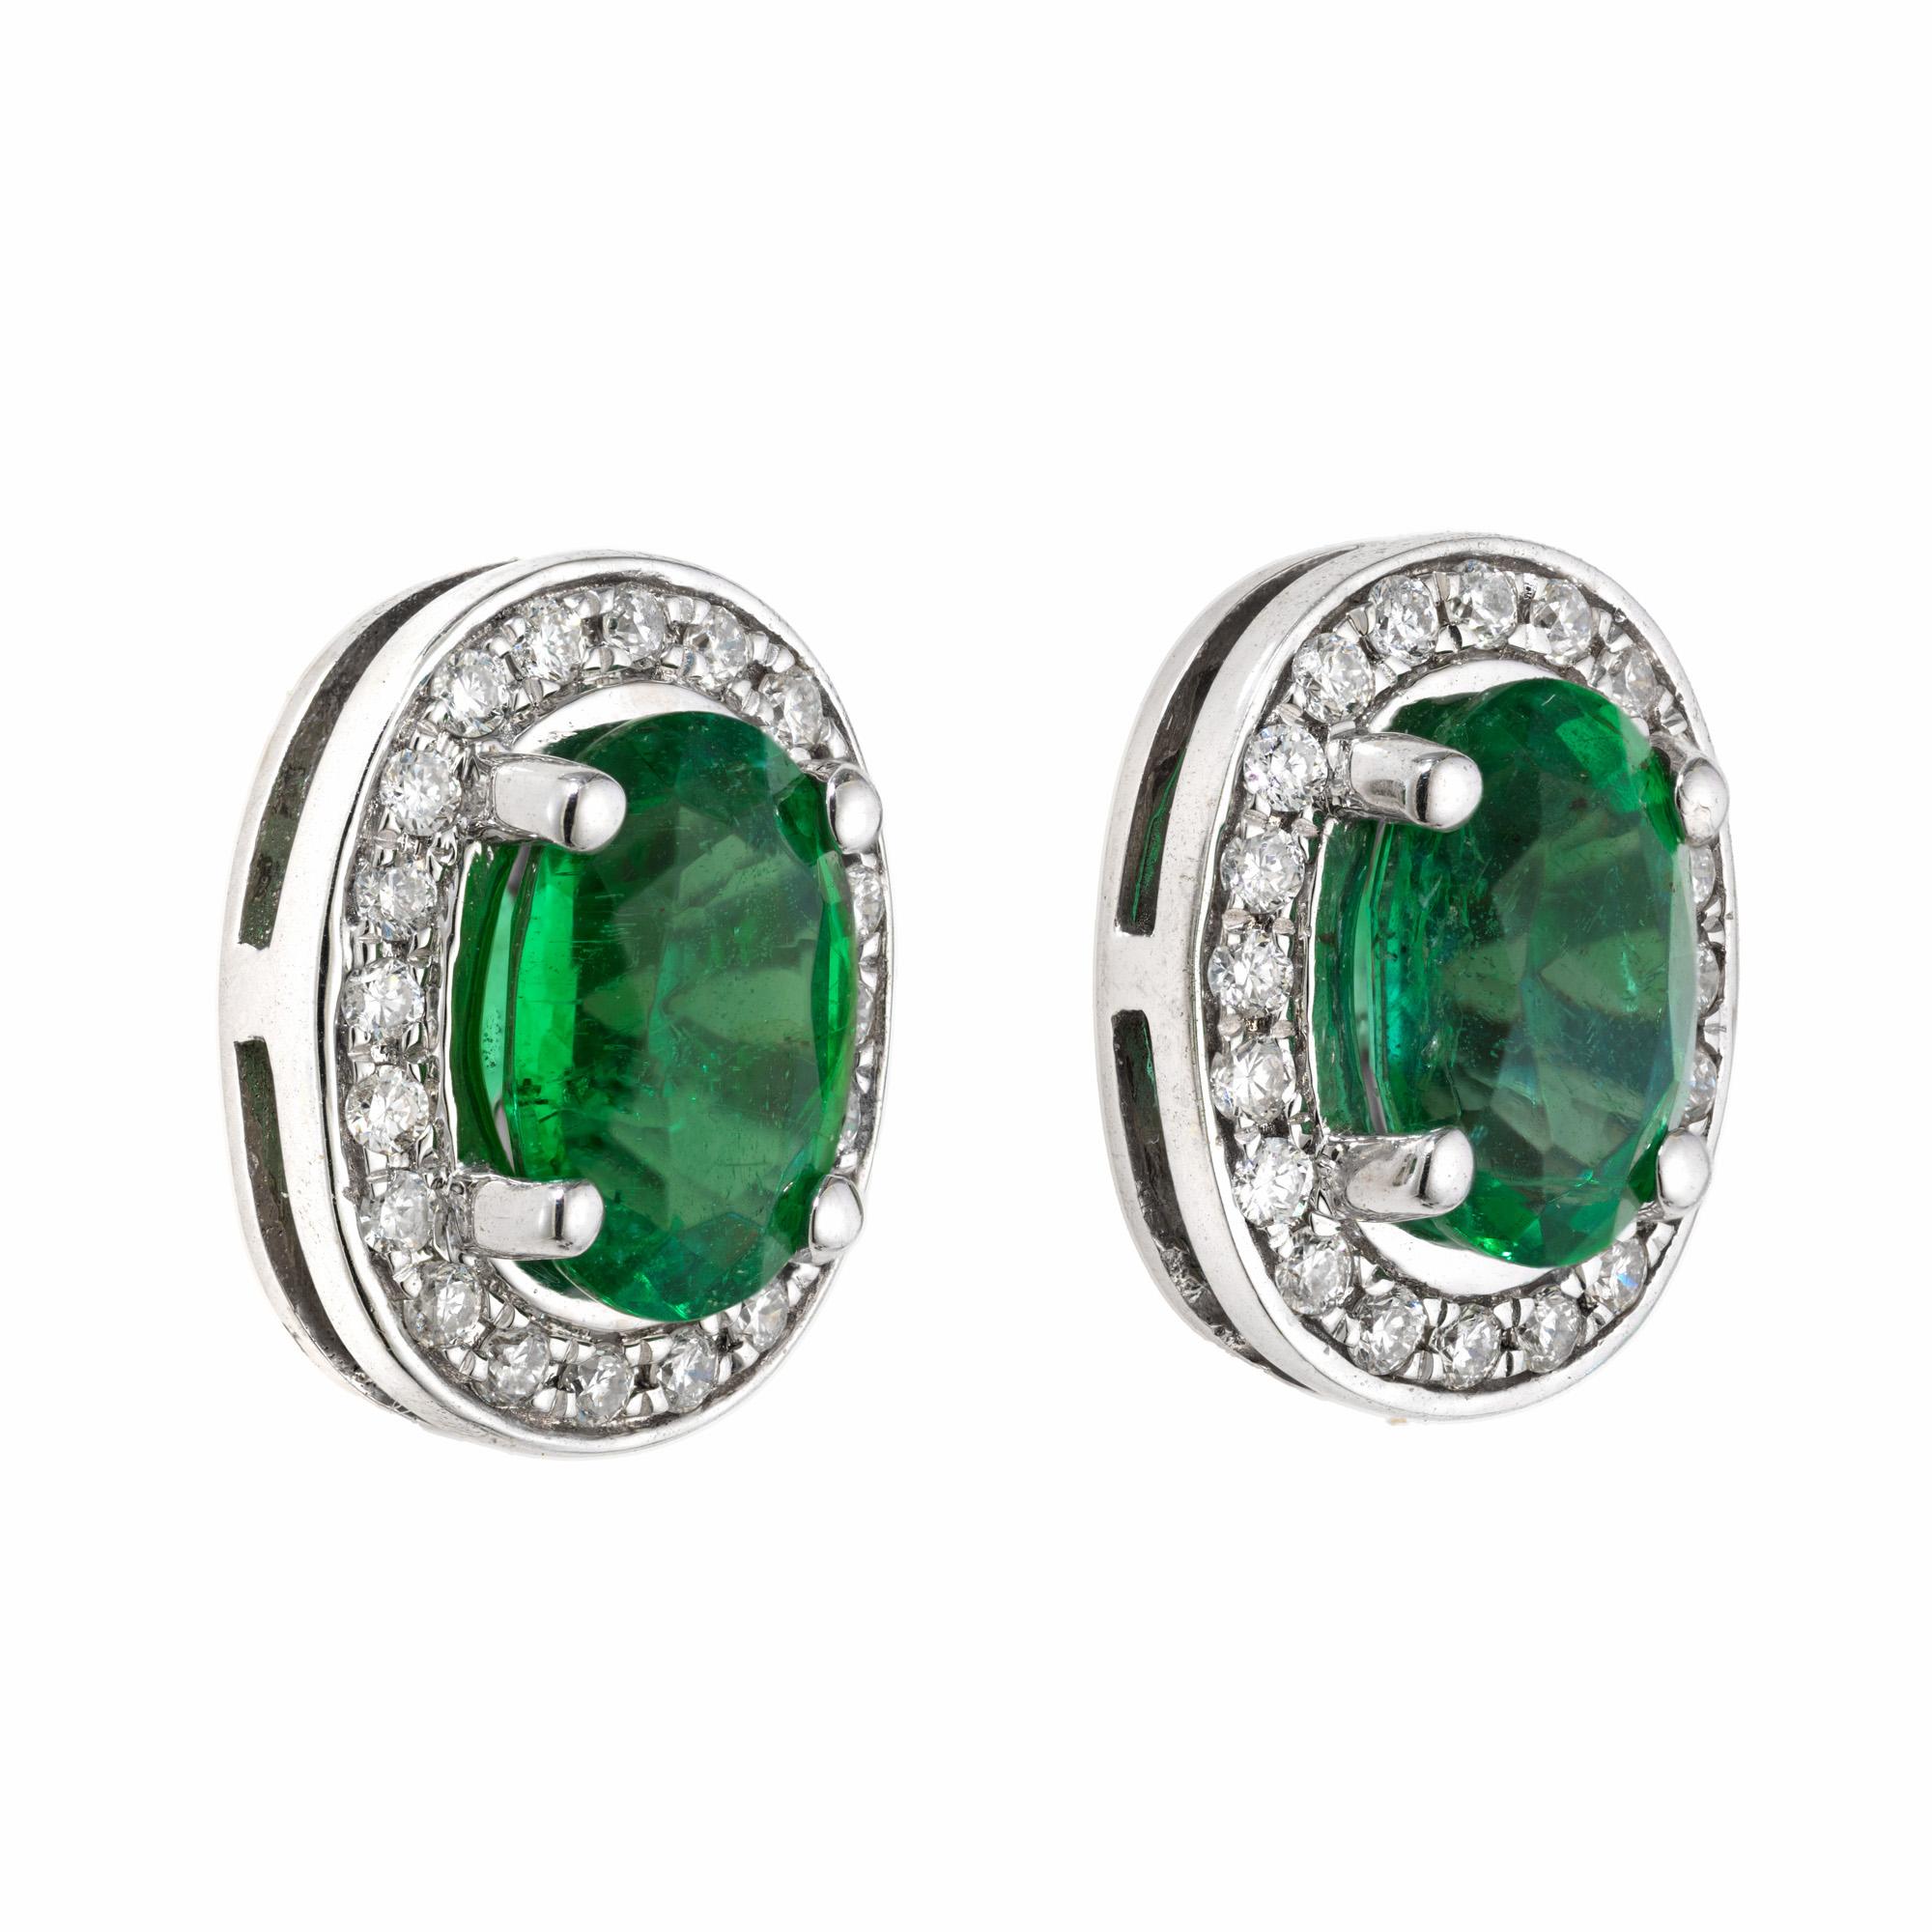 Bright rich green emerald and diamond earrings. GIA certified natural oval brilliant cut emeralds set in 14k white gold four prong settings, each with a halo of near colorless round brilliant cut diamonds. The emeralds have light to moderate clarity